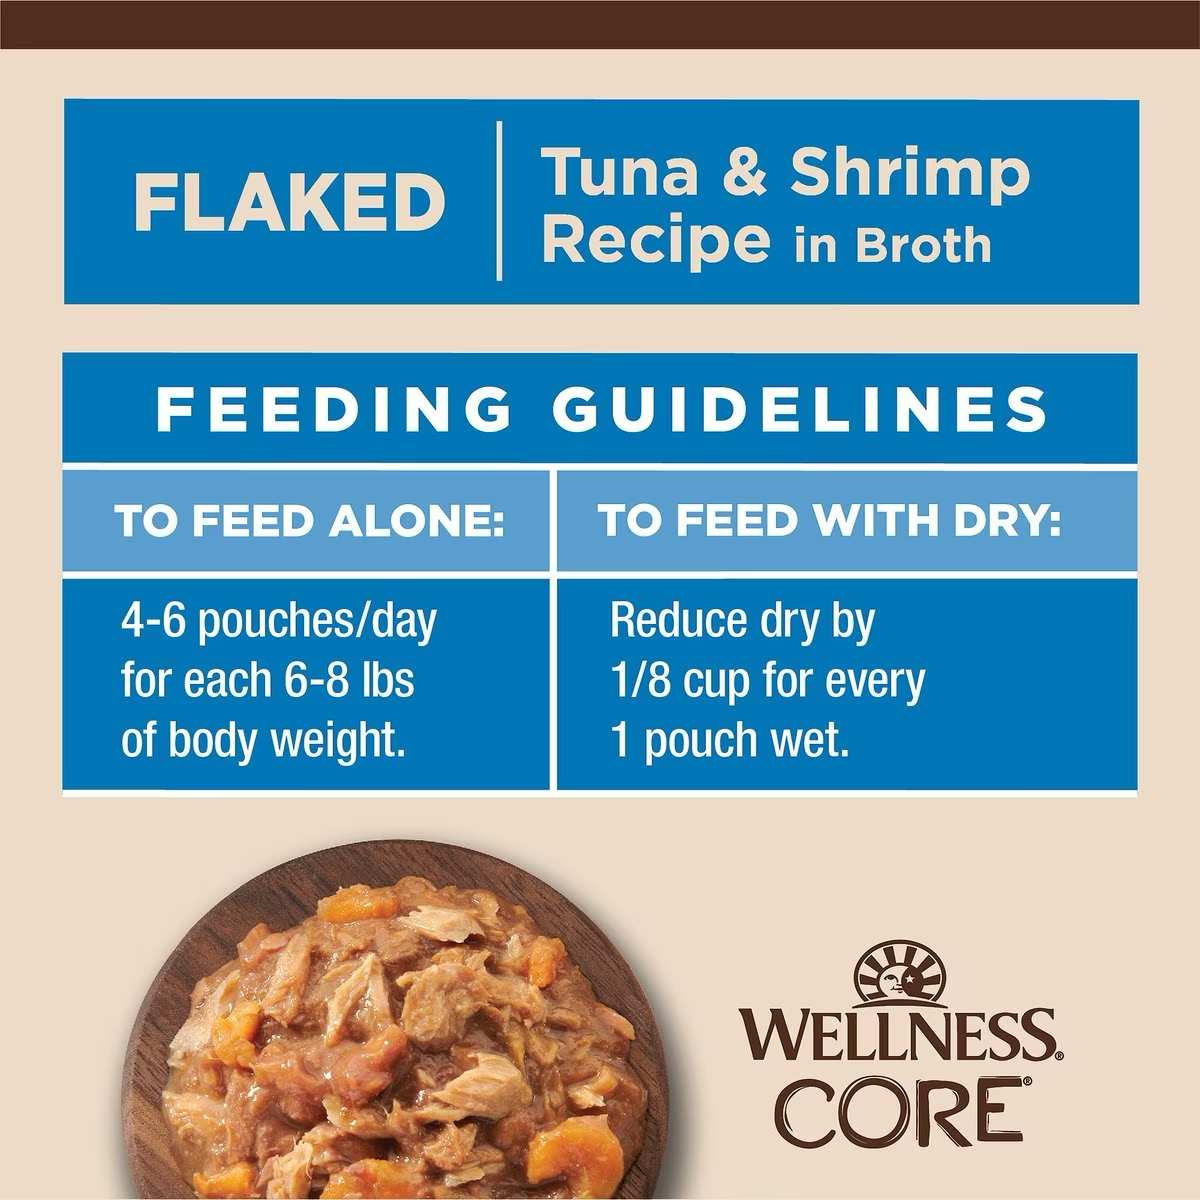 Wellness CORE Tiny Tasters Flaked Tuna & Shrimp in Sauce Wet Cat Food  Canned Cat Food  | PetMax Canada